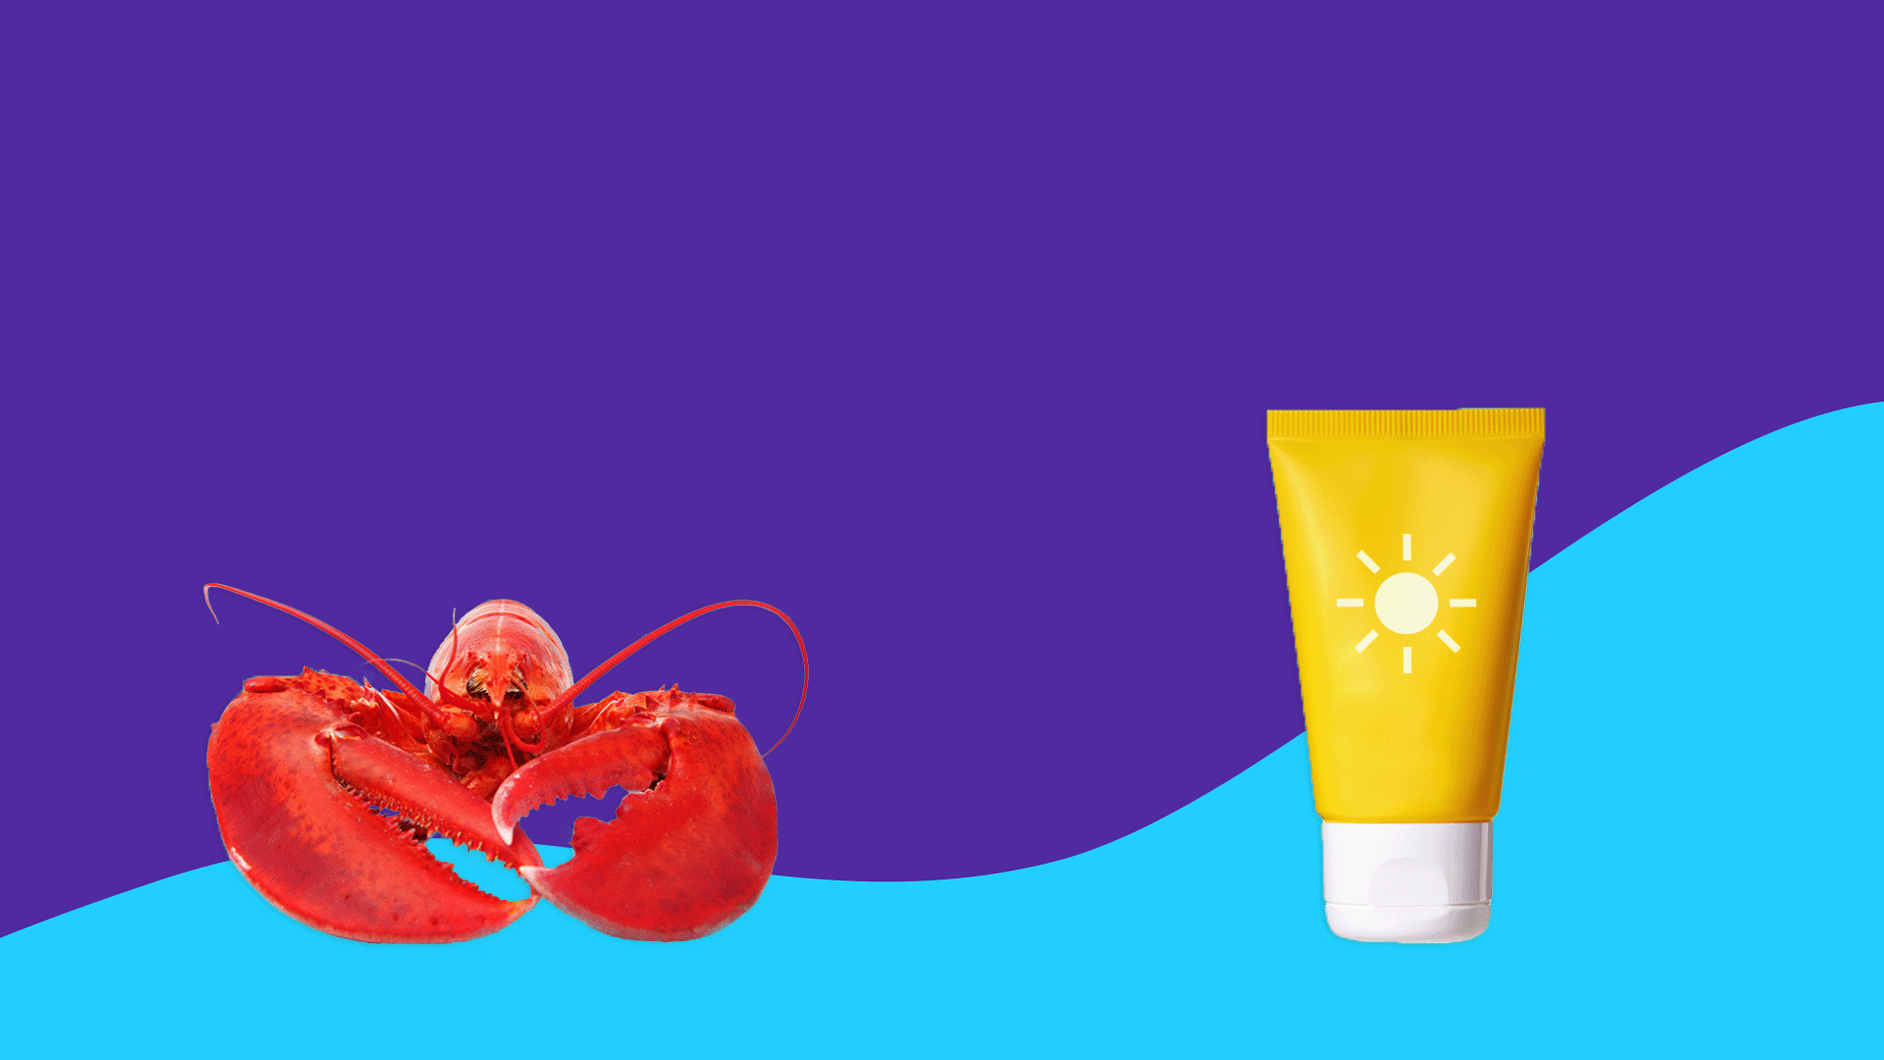 sunburn relief - a lobster and sunscreen bottle